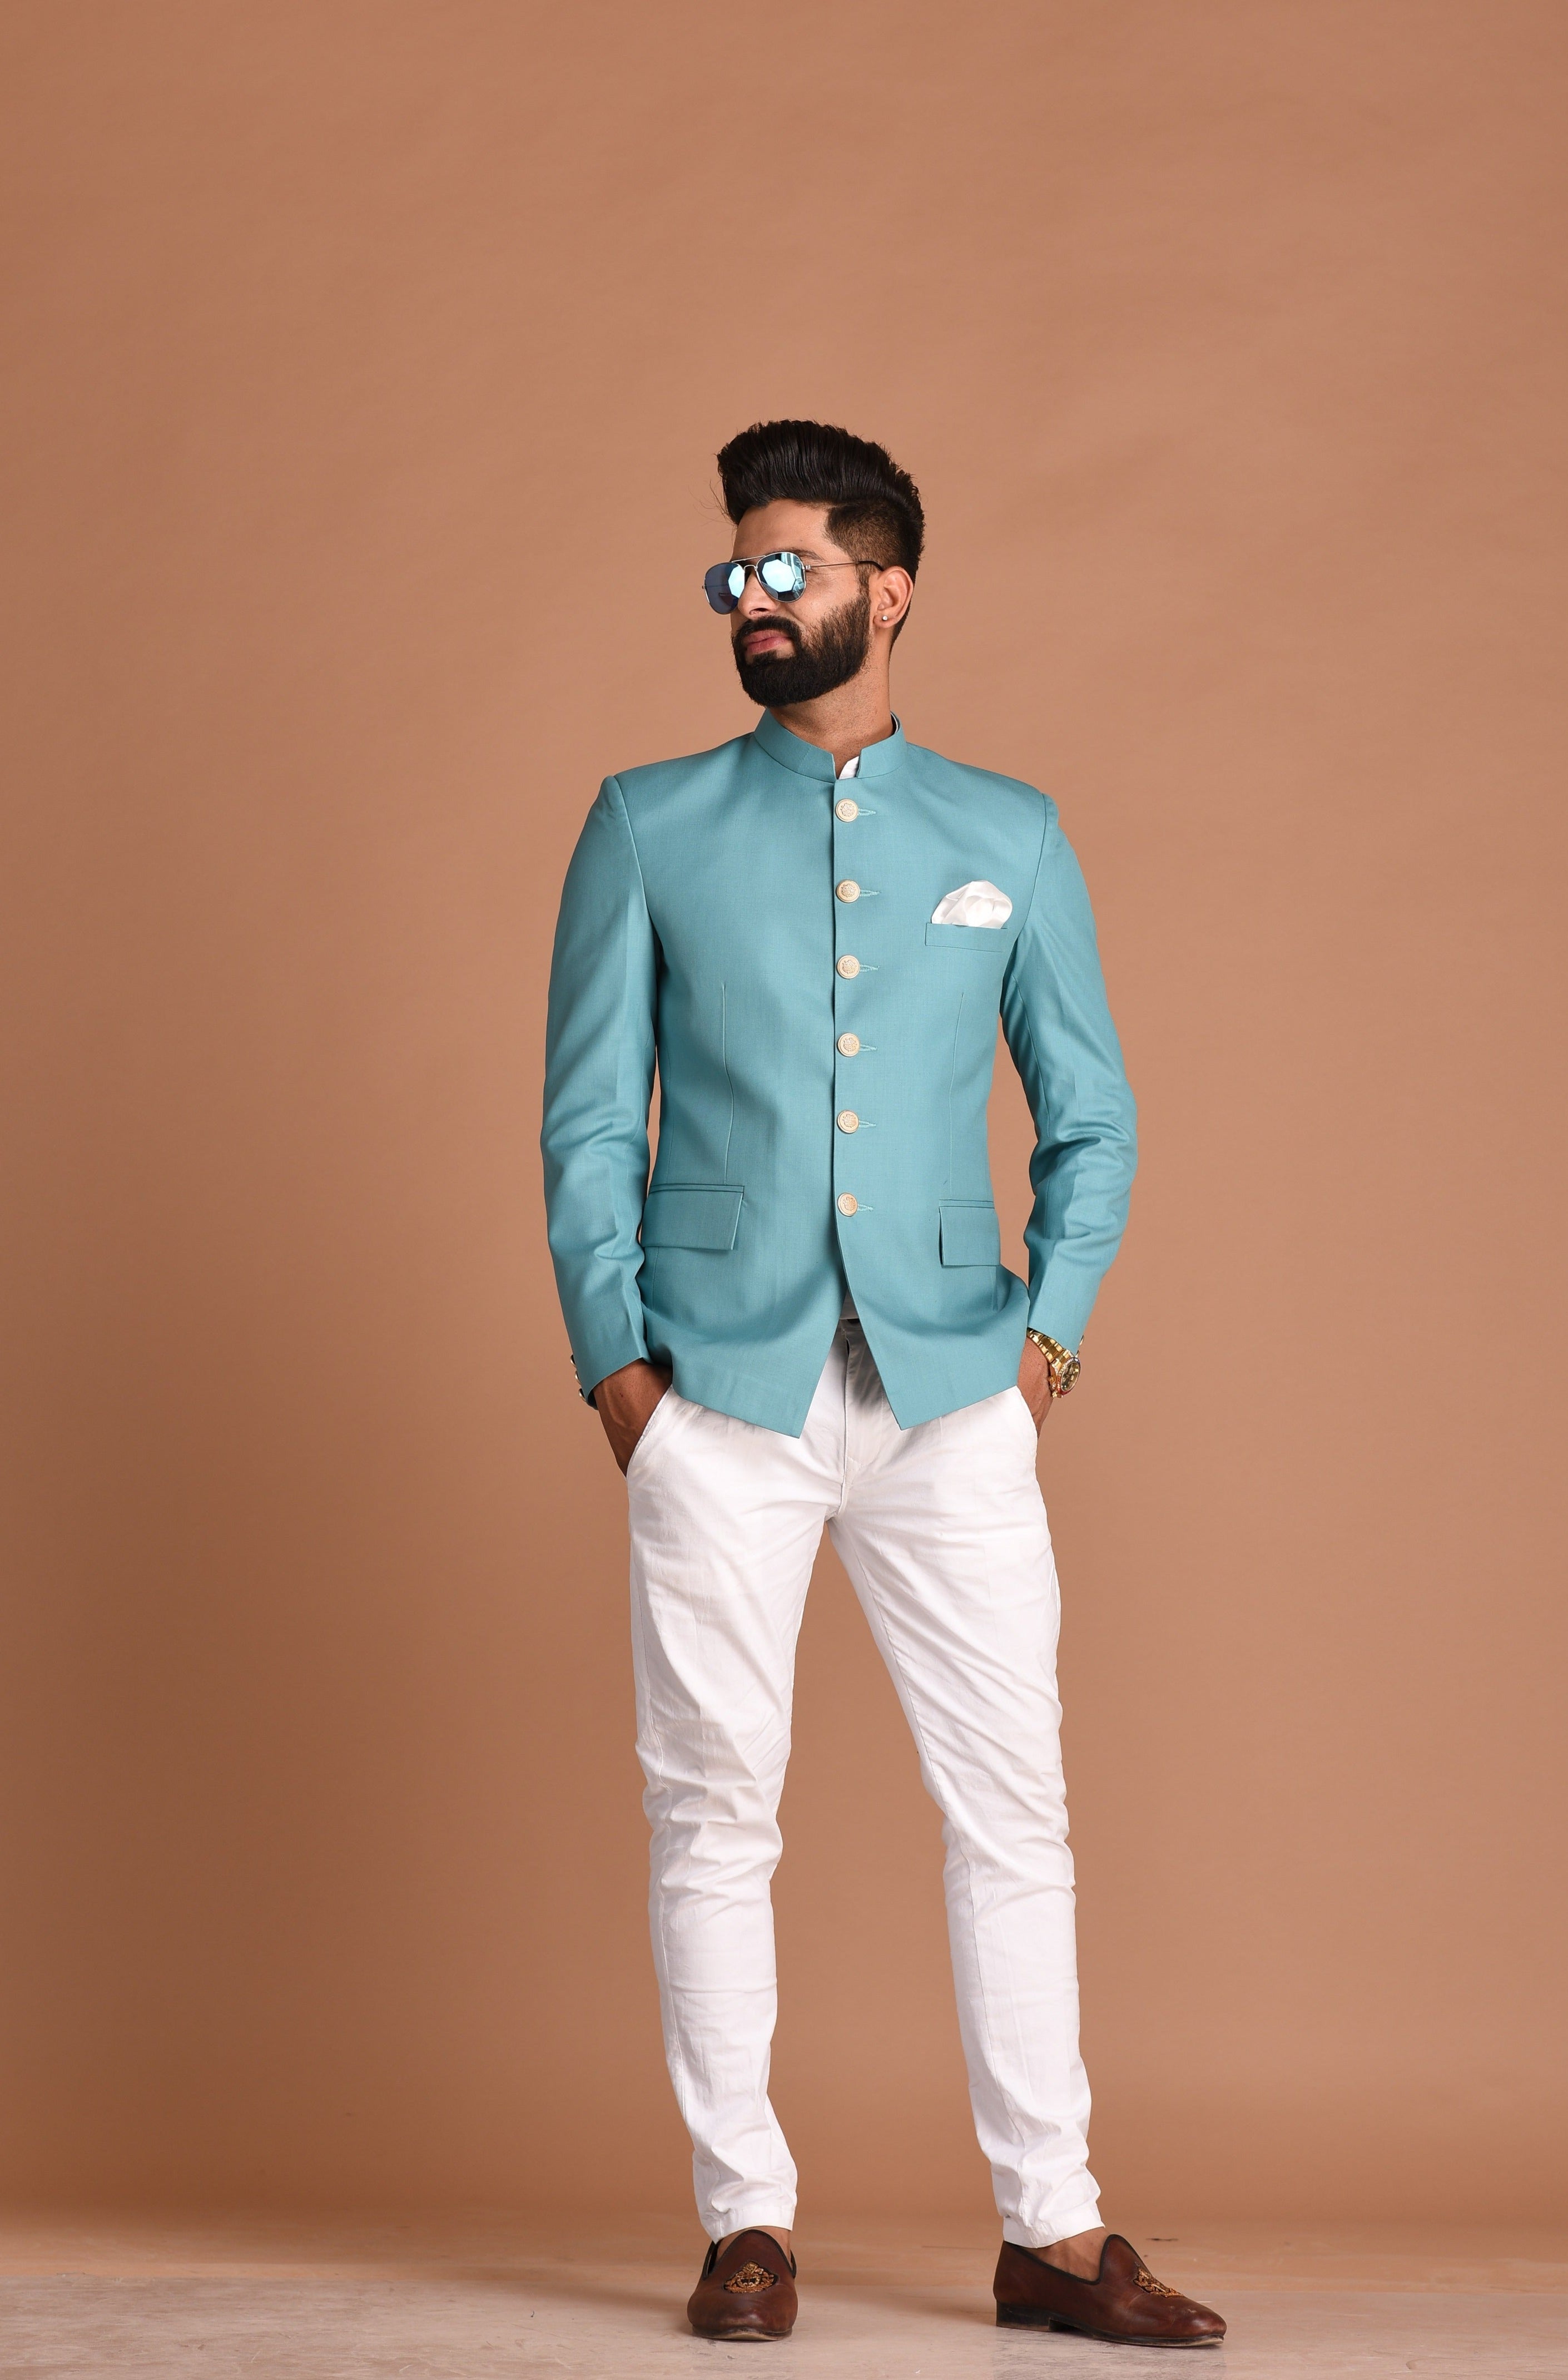 Stunning Oxy Blue  Jodhpuri Bandhgala Blazer With White Trouser | Perfect for Formal Party Wear for Open and Daylight Functions | Youth Inspired